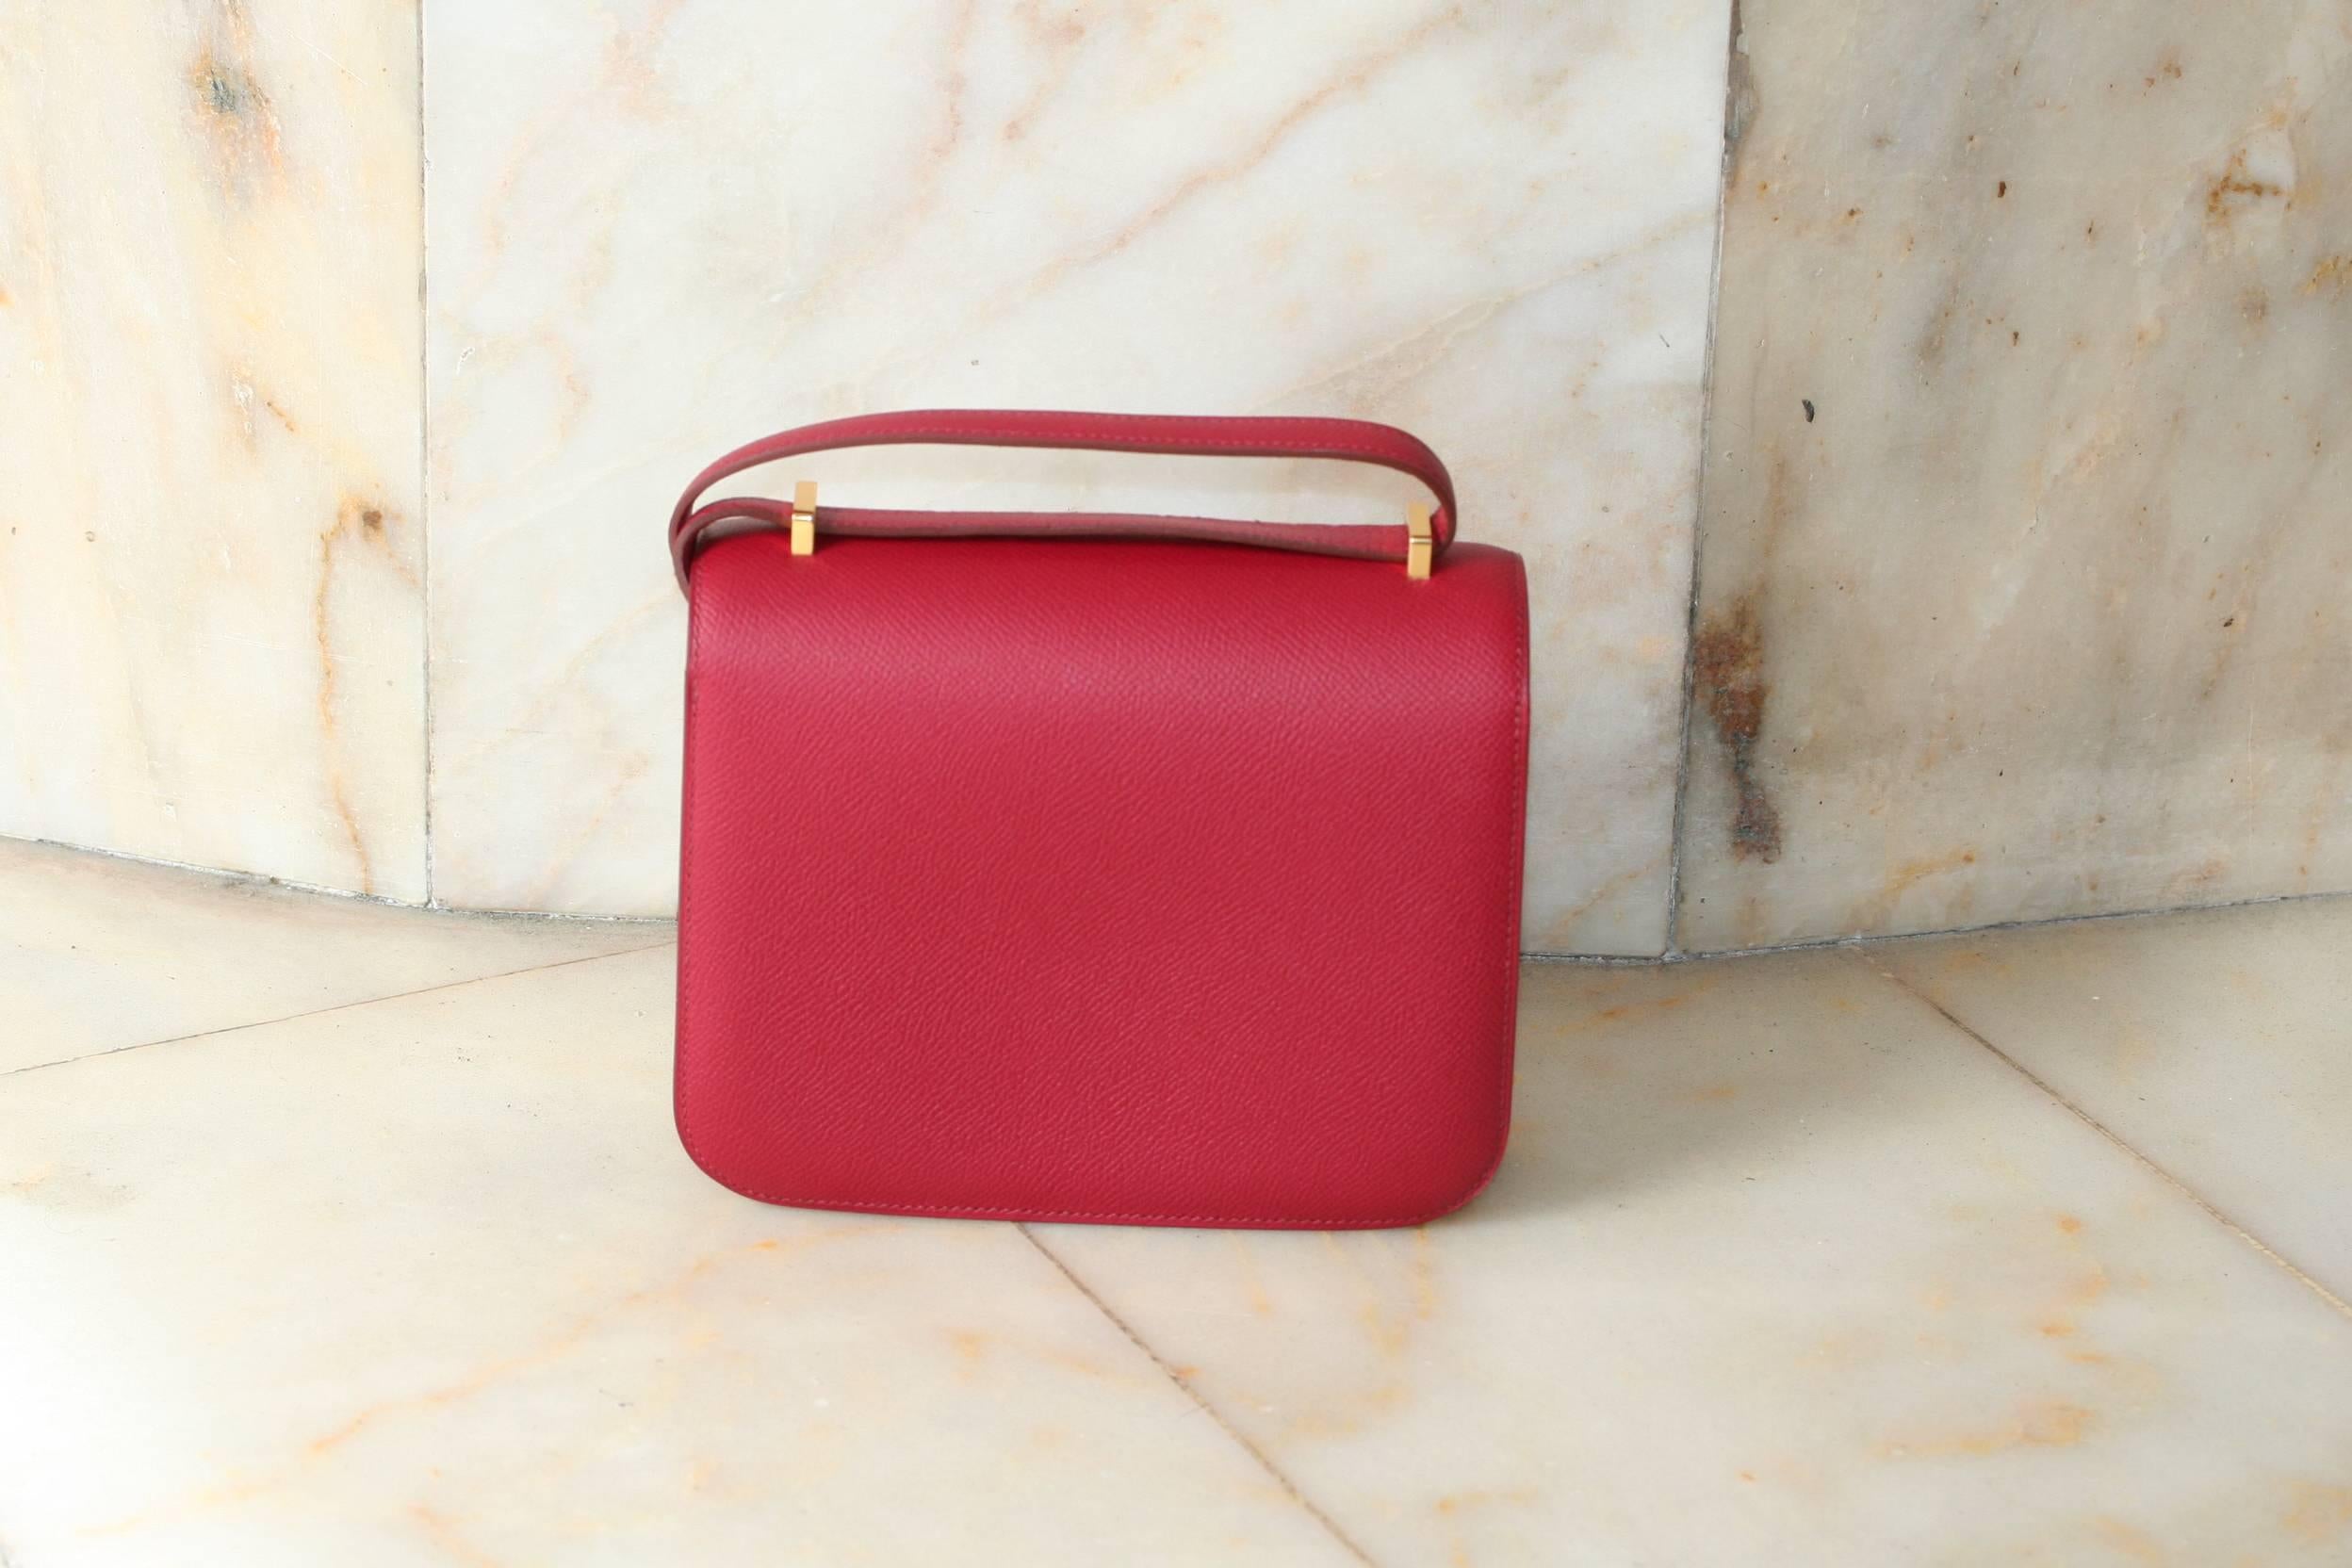 HERMES Constance Mini Epsom Rubis 18'
Handbag gold hardware (18x14x6cm), comes with complete packaging and accessories, original invoice. Pristine, unworn condition.